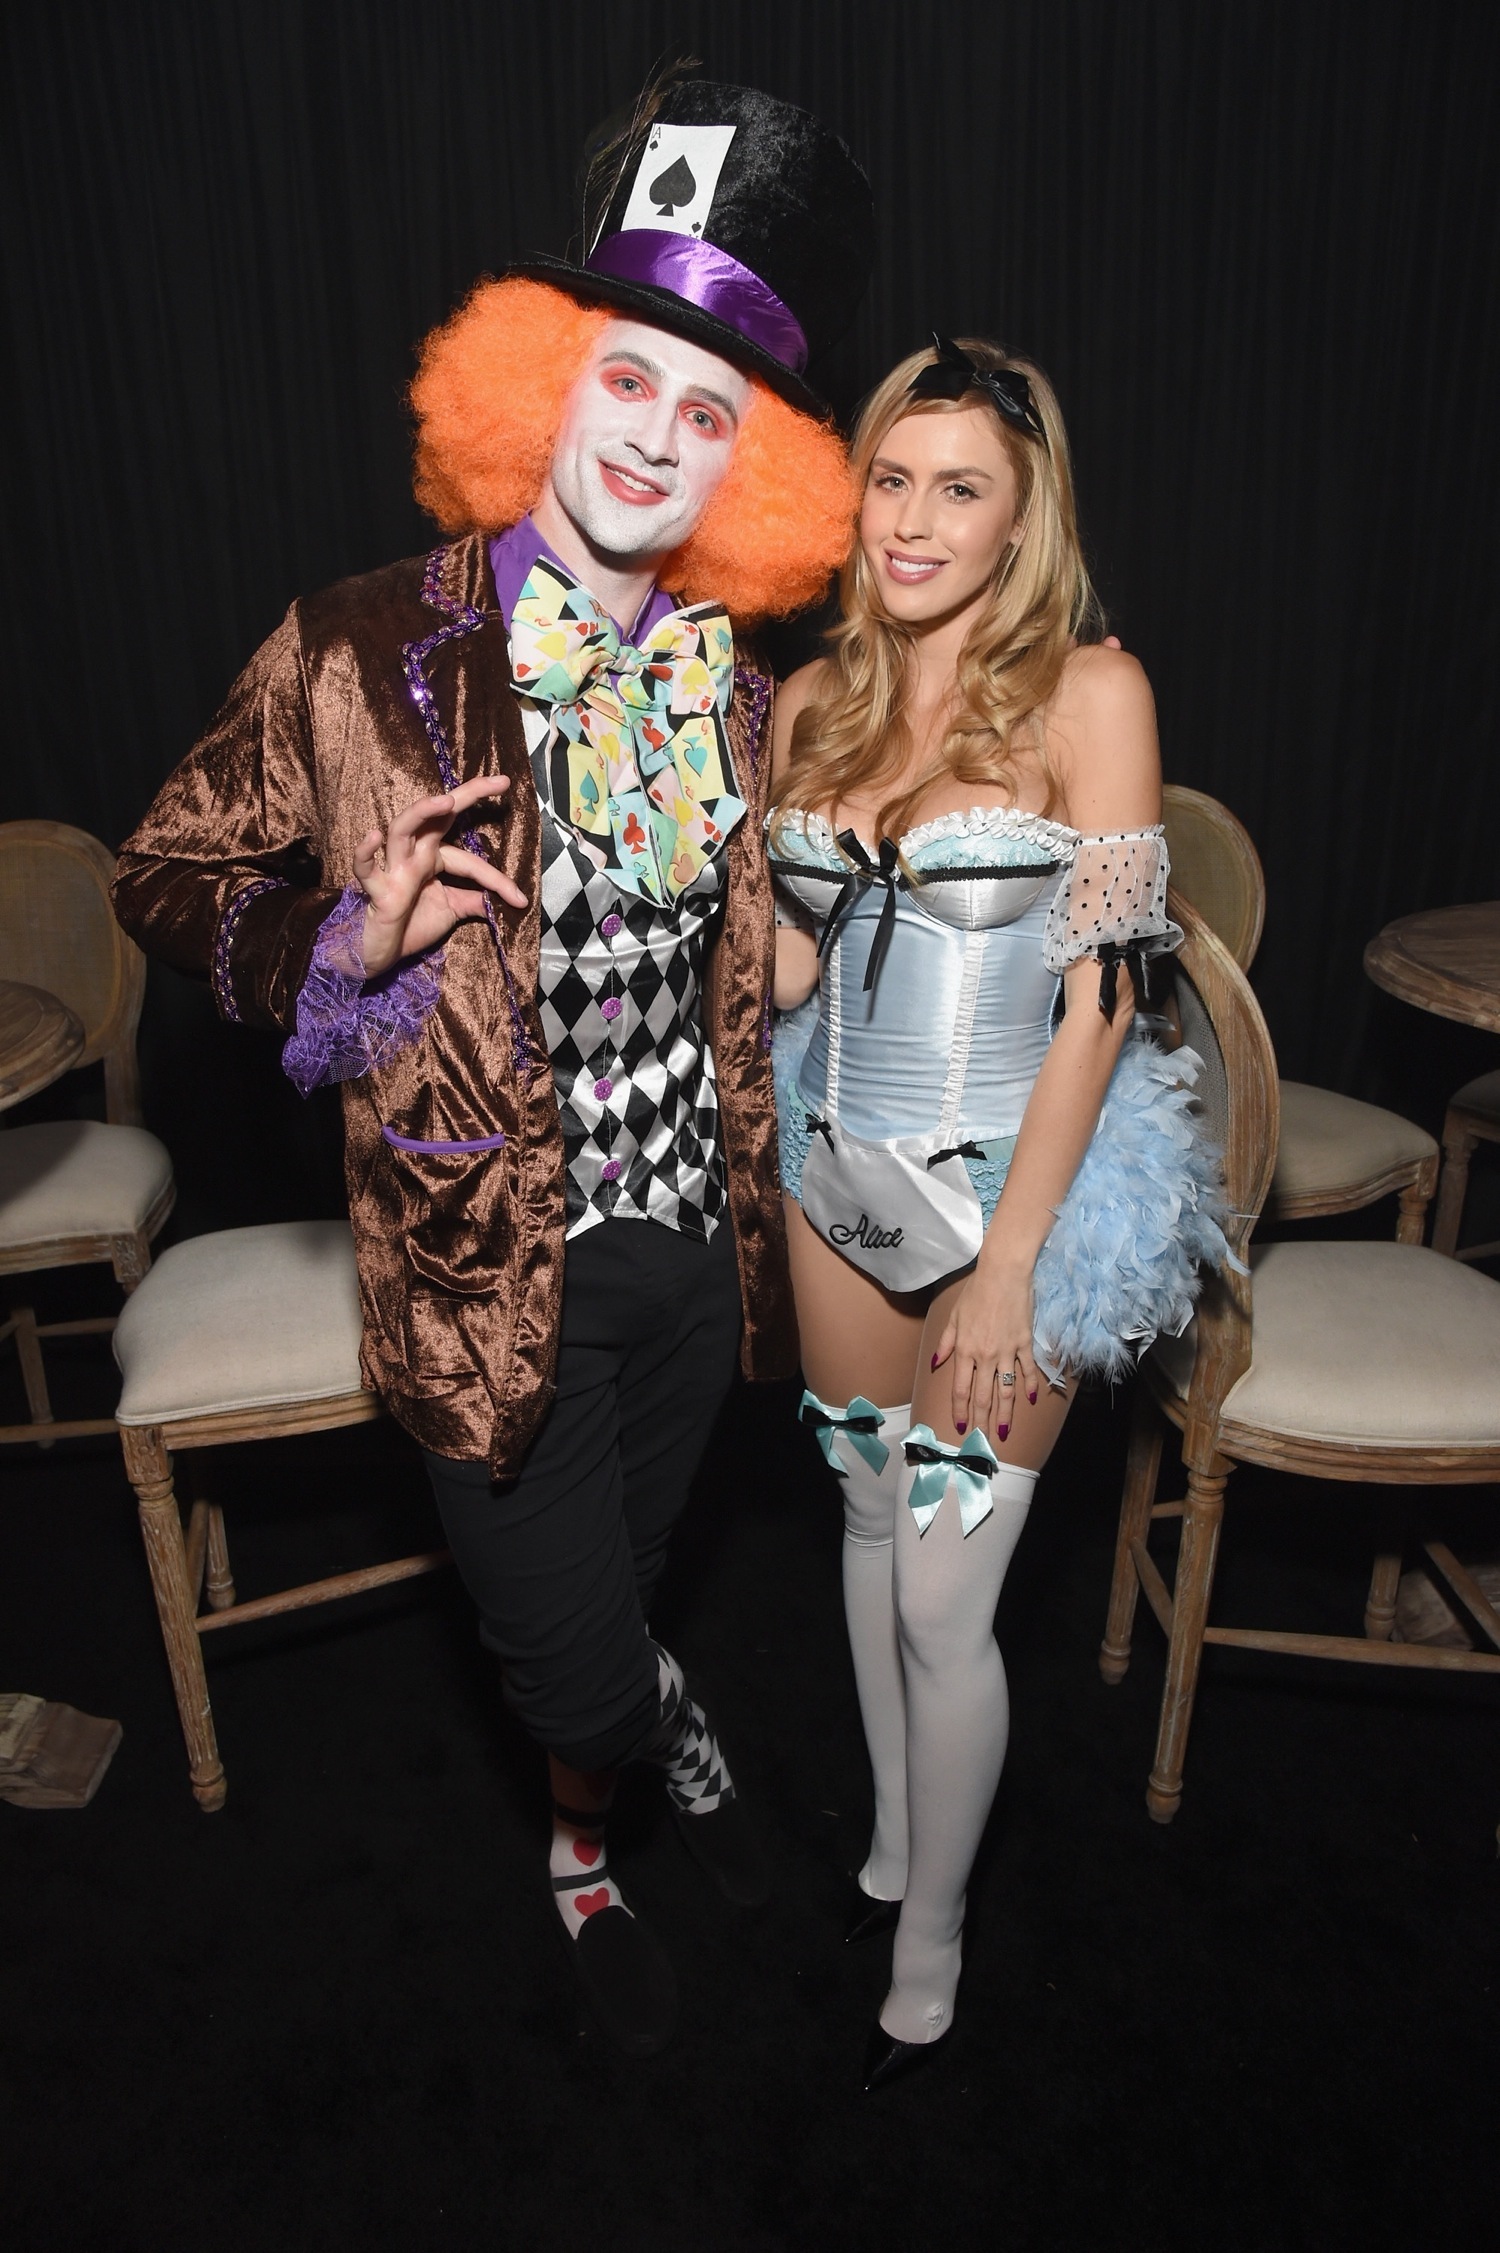 Clooney, Gerber & Meldman -- Casamigos Halloween Party the Place to Be (PHOTO GALLERY)